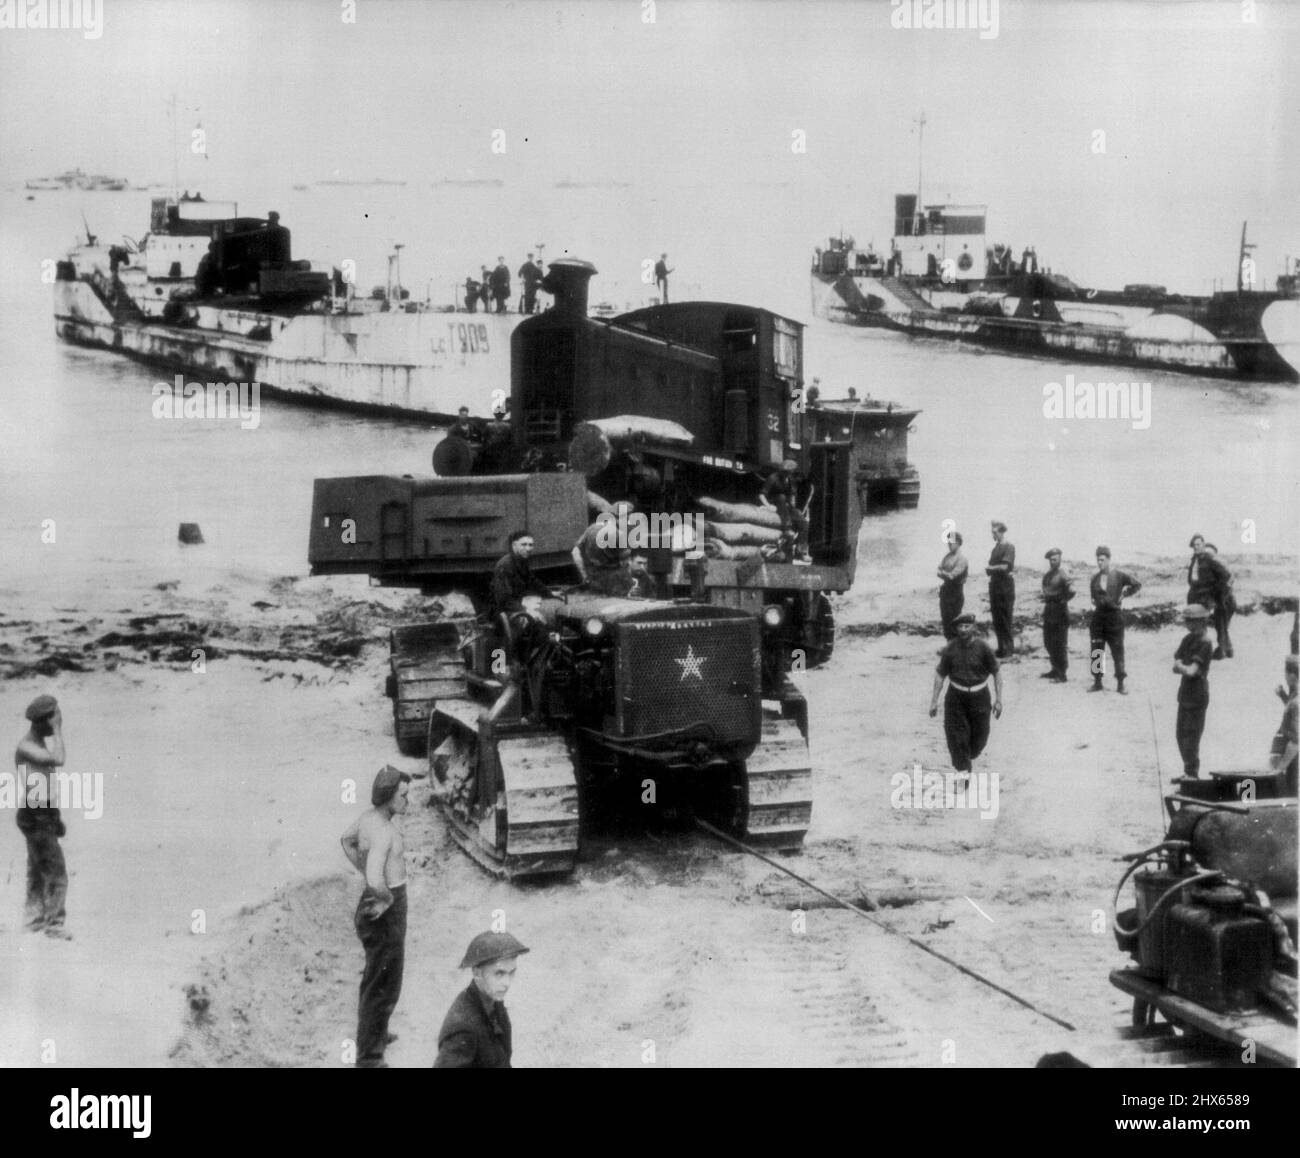 Iron Horses Reach Normandy -- Diesel railroad engines are brought ashore from landing craft in Normandy, France, to aid in the handling of supplies over captured railways. August 1, 1944. (Photo by AP Wirephoto). Stock Photo